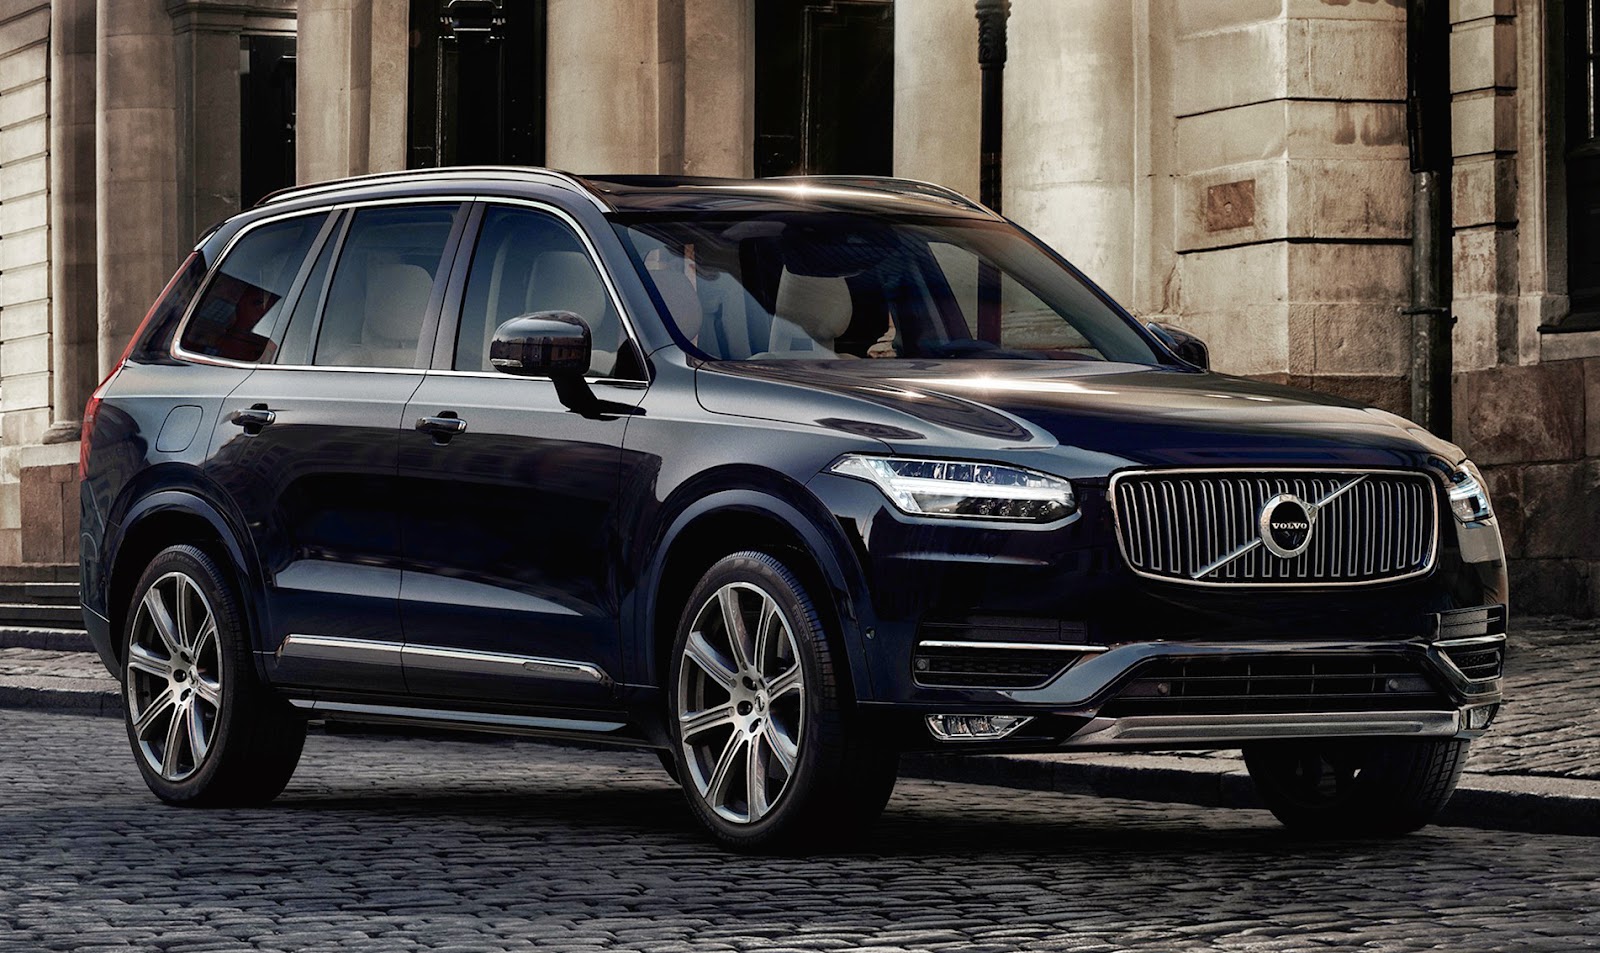 2015 Volvo XC90 Car Review and Modification